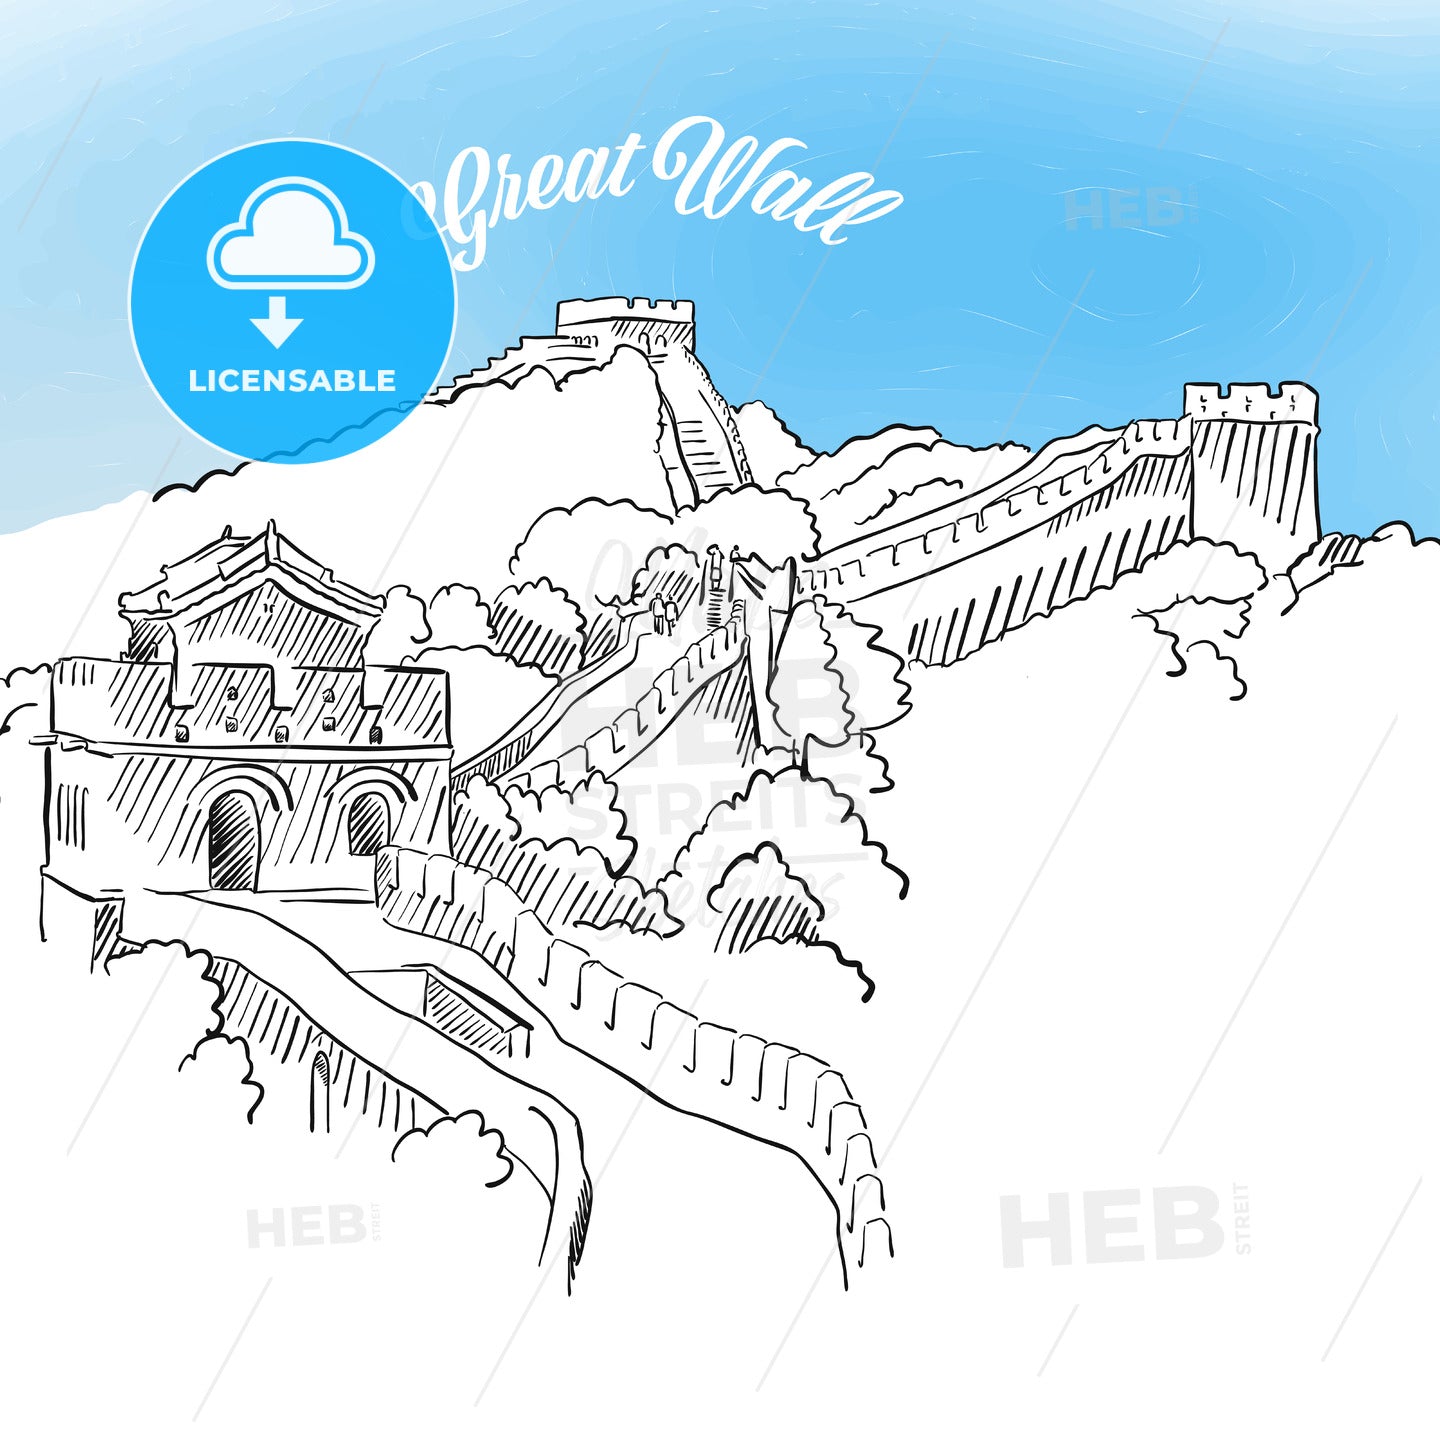 Sketch of Great Wall in China – instant download